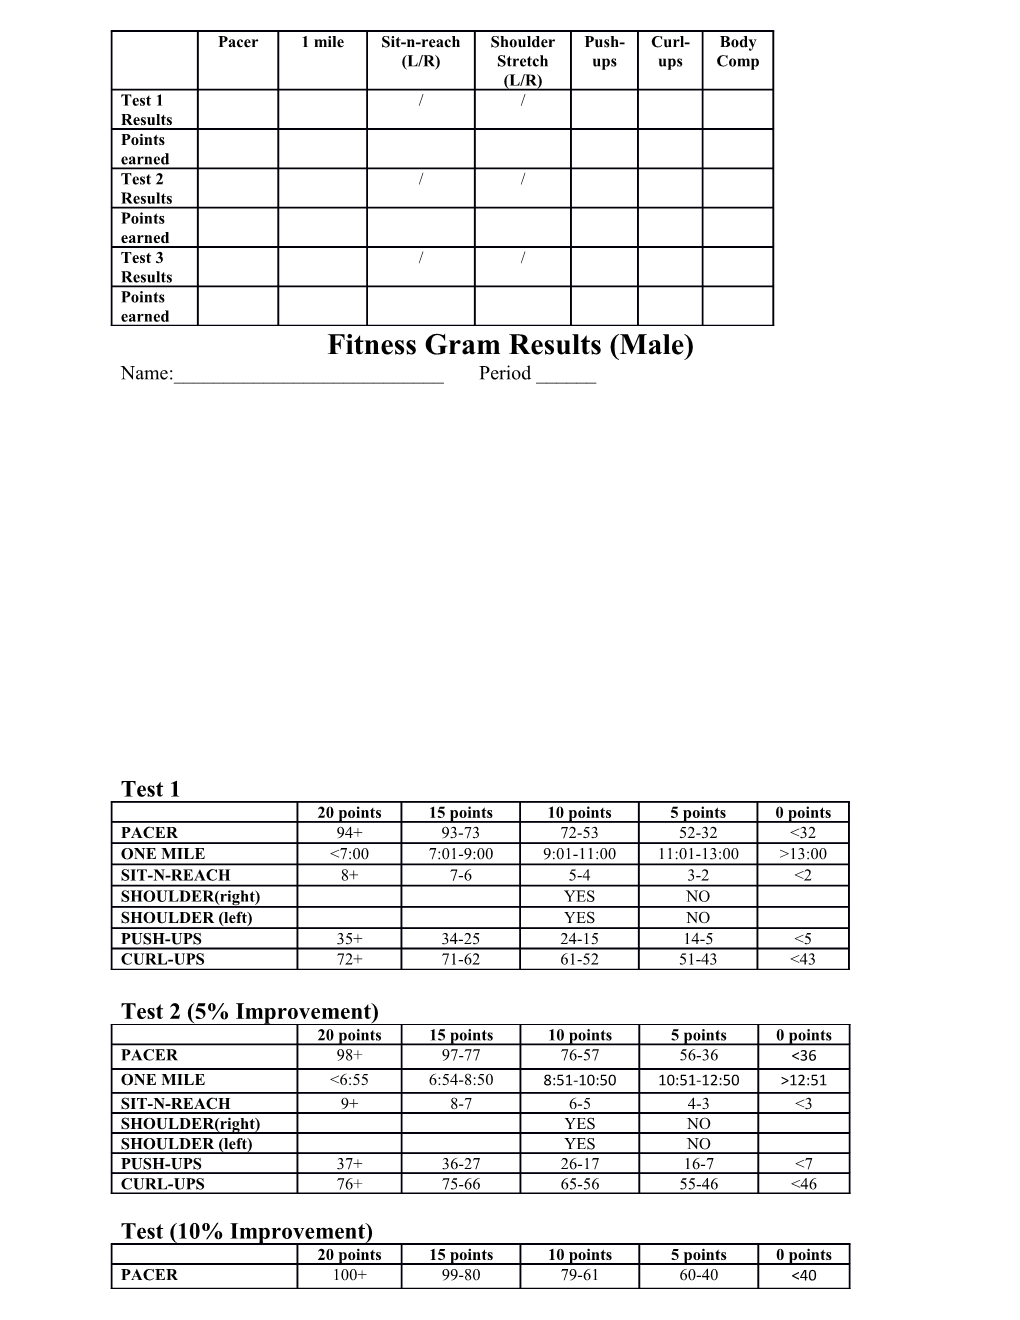 Fitness Gram Results (Male)